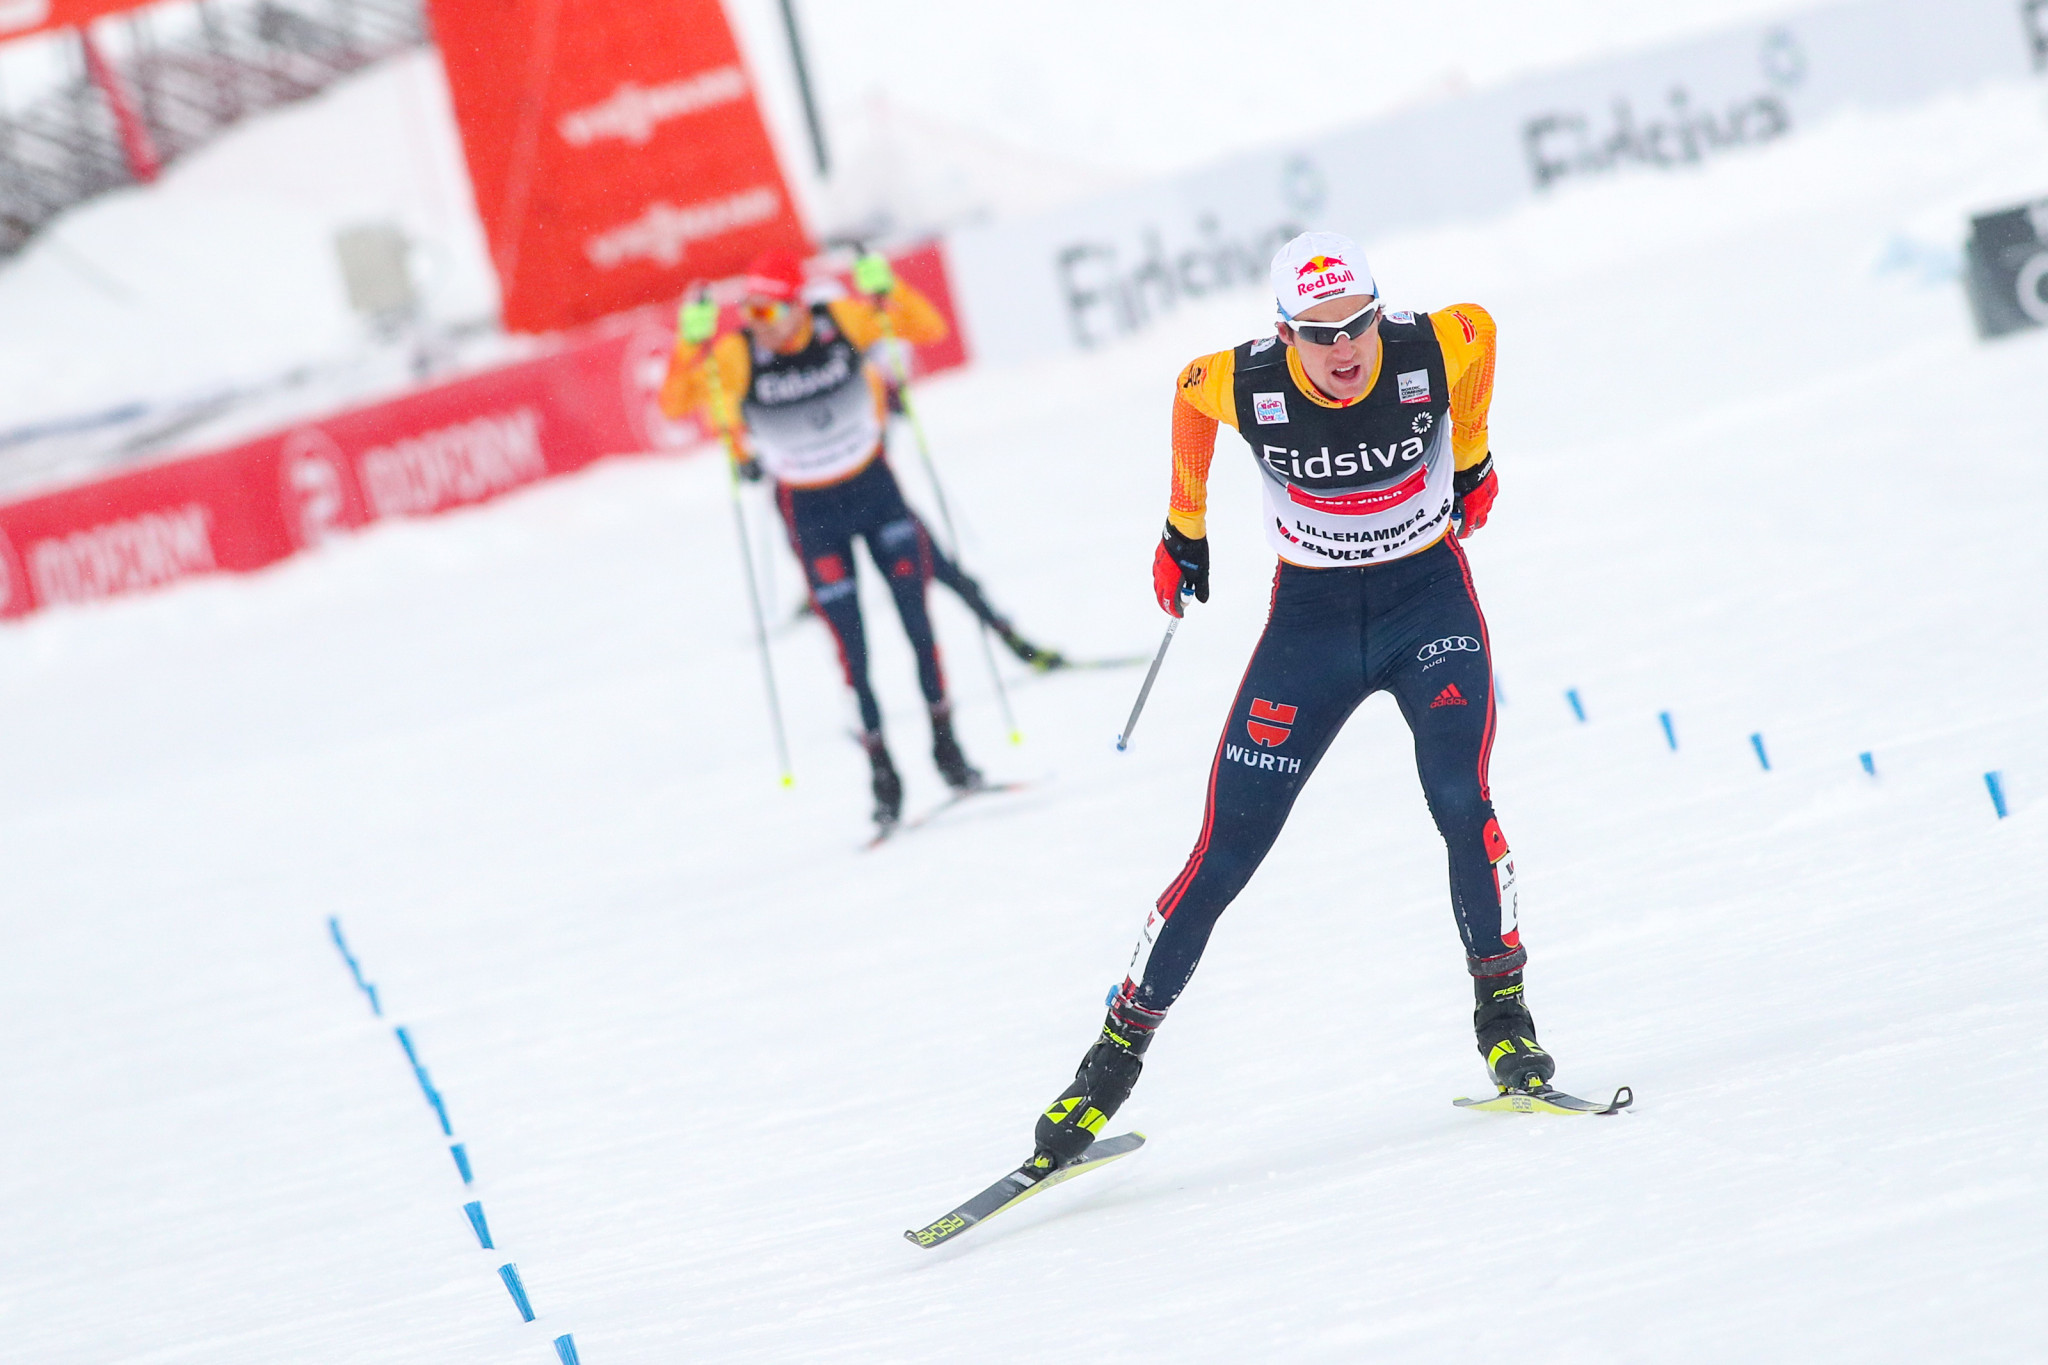 FIS Nordic Combined World Cup to resume in Italy with Geiger aiming to continue fine form